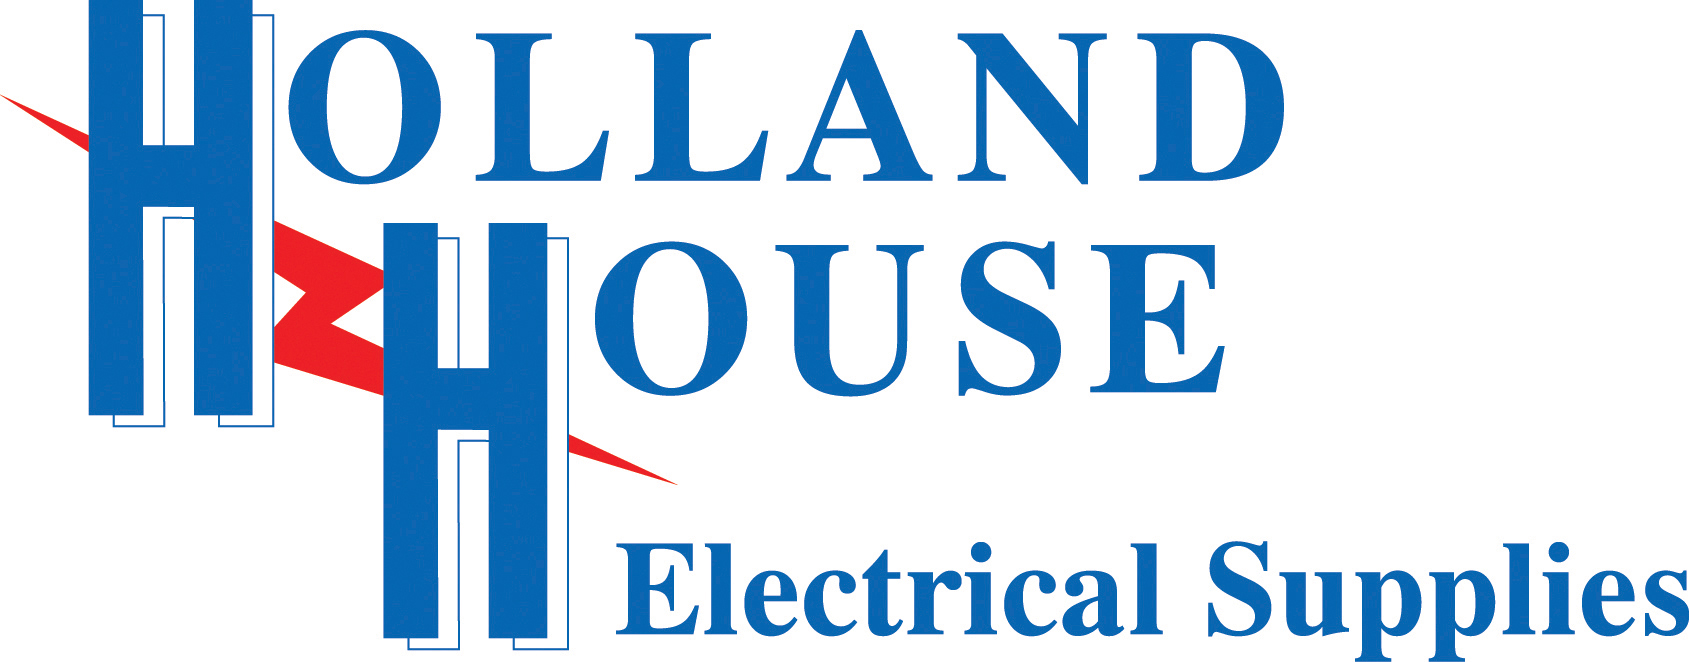 Holland House Electrical Co Ltd